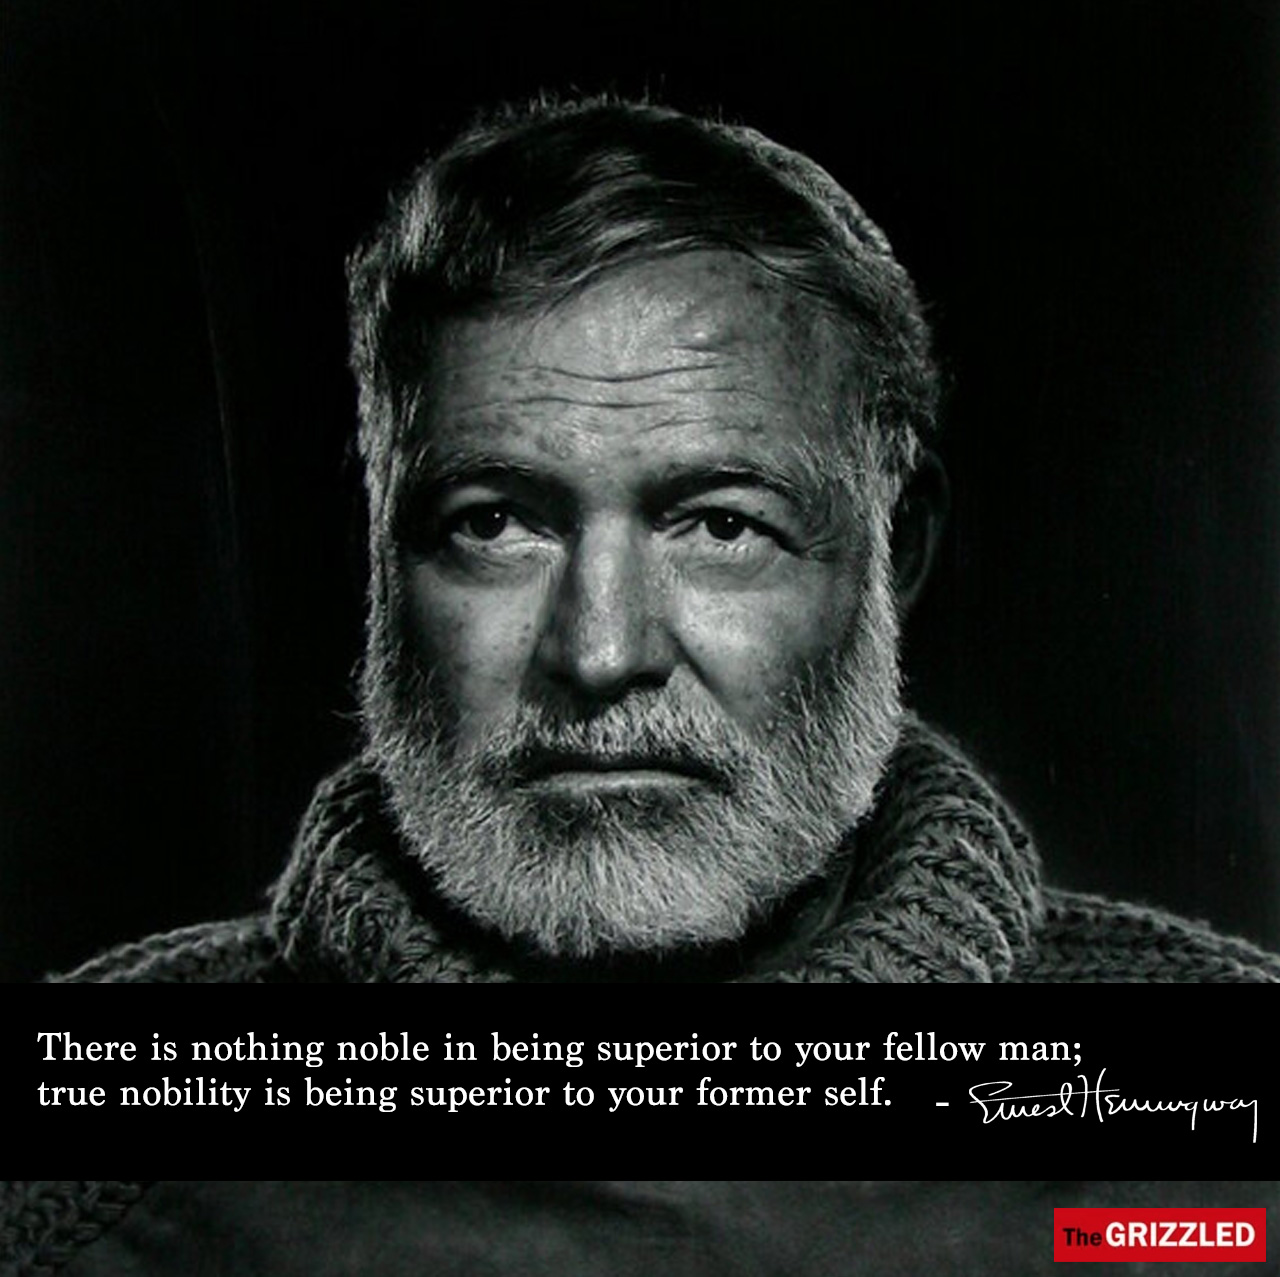 Ernest Hemingway Quote "There is nothing noble in being superior to your fellow man; true nobility is being superior to your former self."